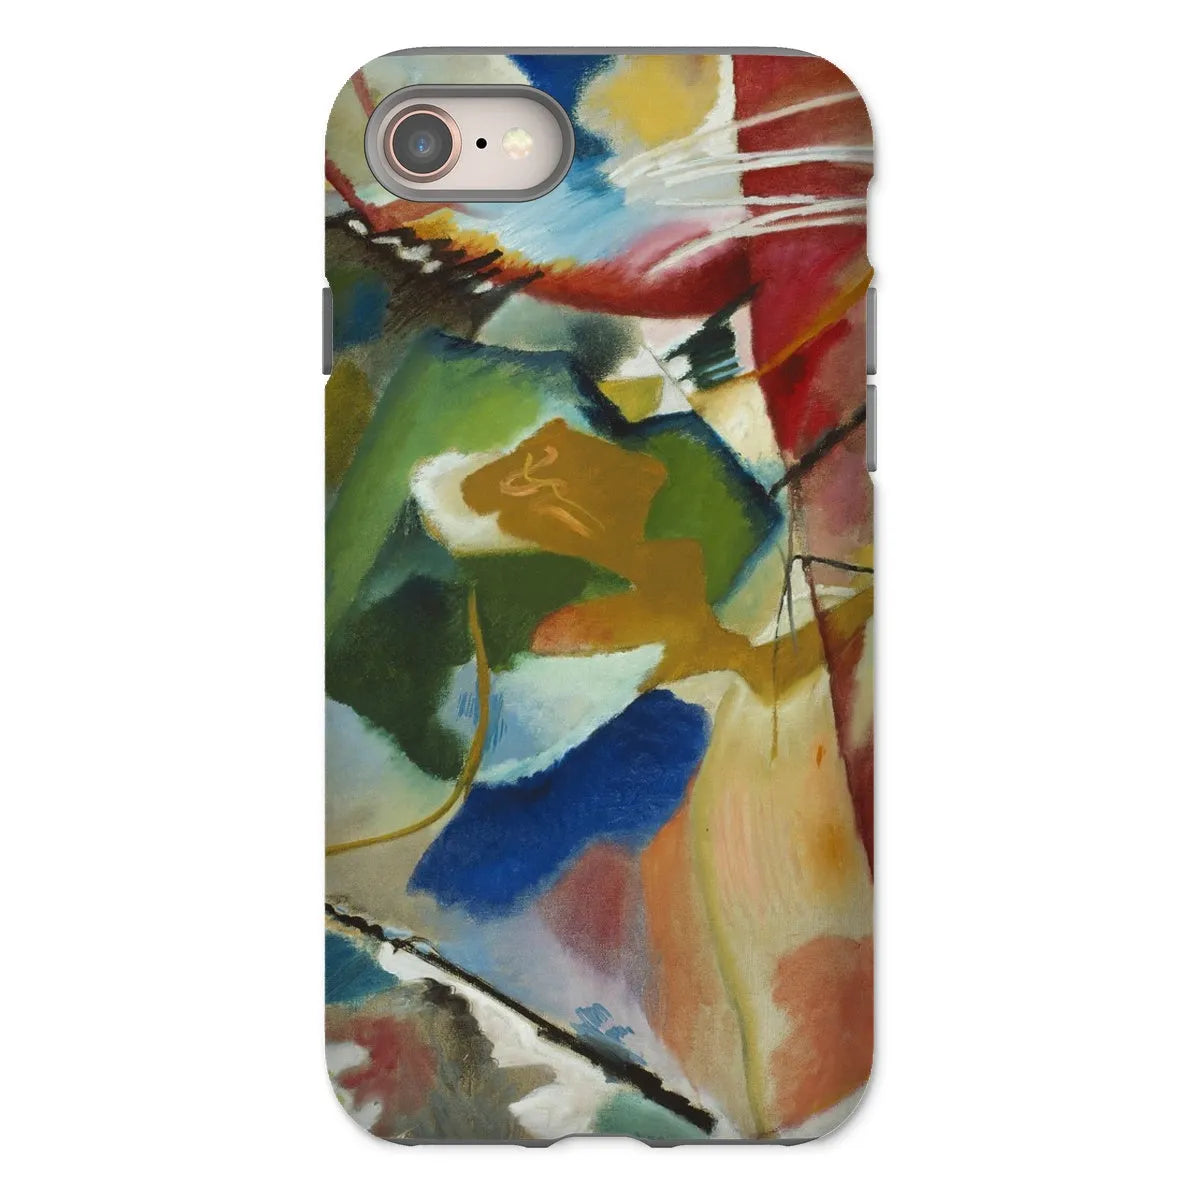 Painting With Green Center Art Phone Case - Wassily Kandinsky - Iphone 8 / Matte - Mobile Phone Cases - Aesthetic Art